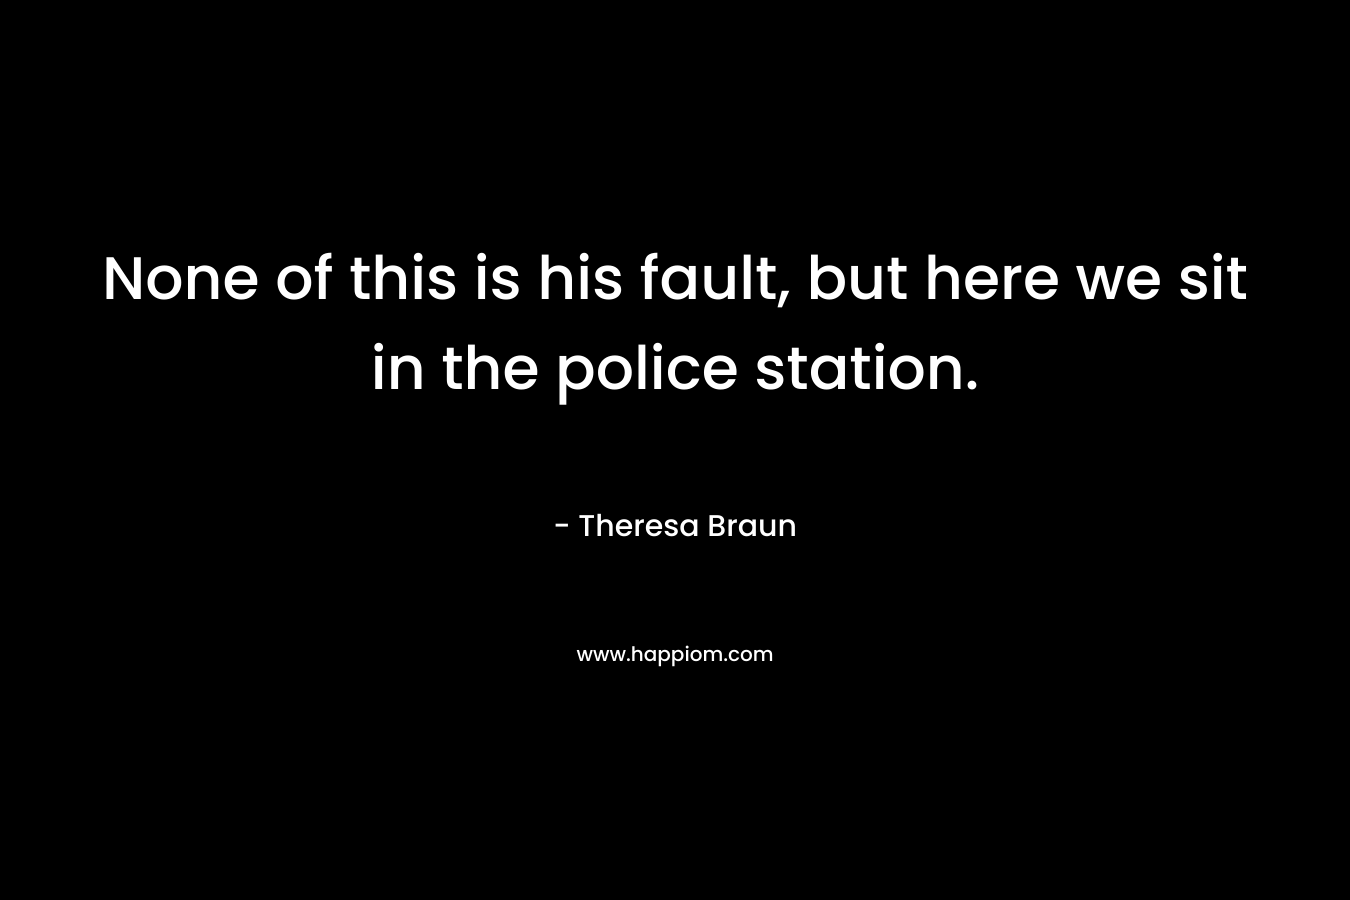 None of this is his fault, but here we sit in the police station. – Theresa Braun